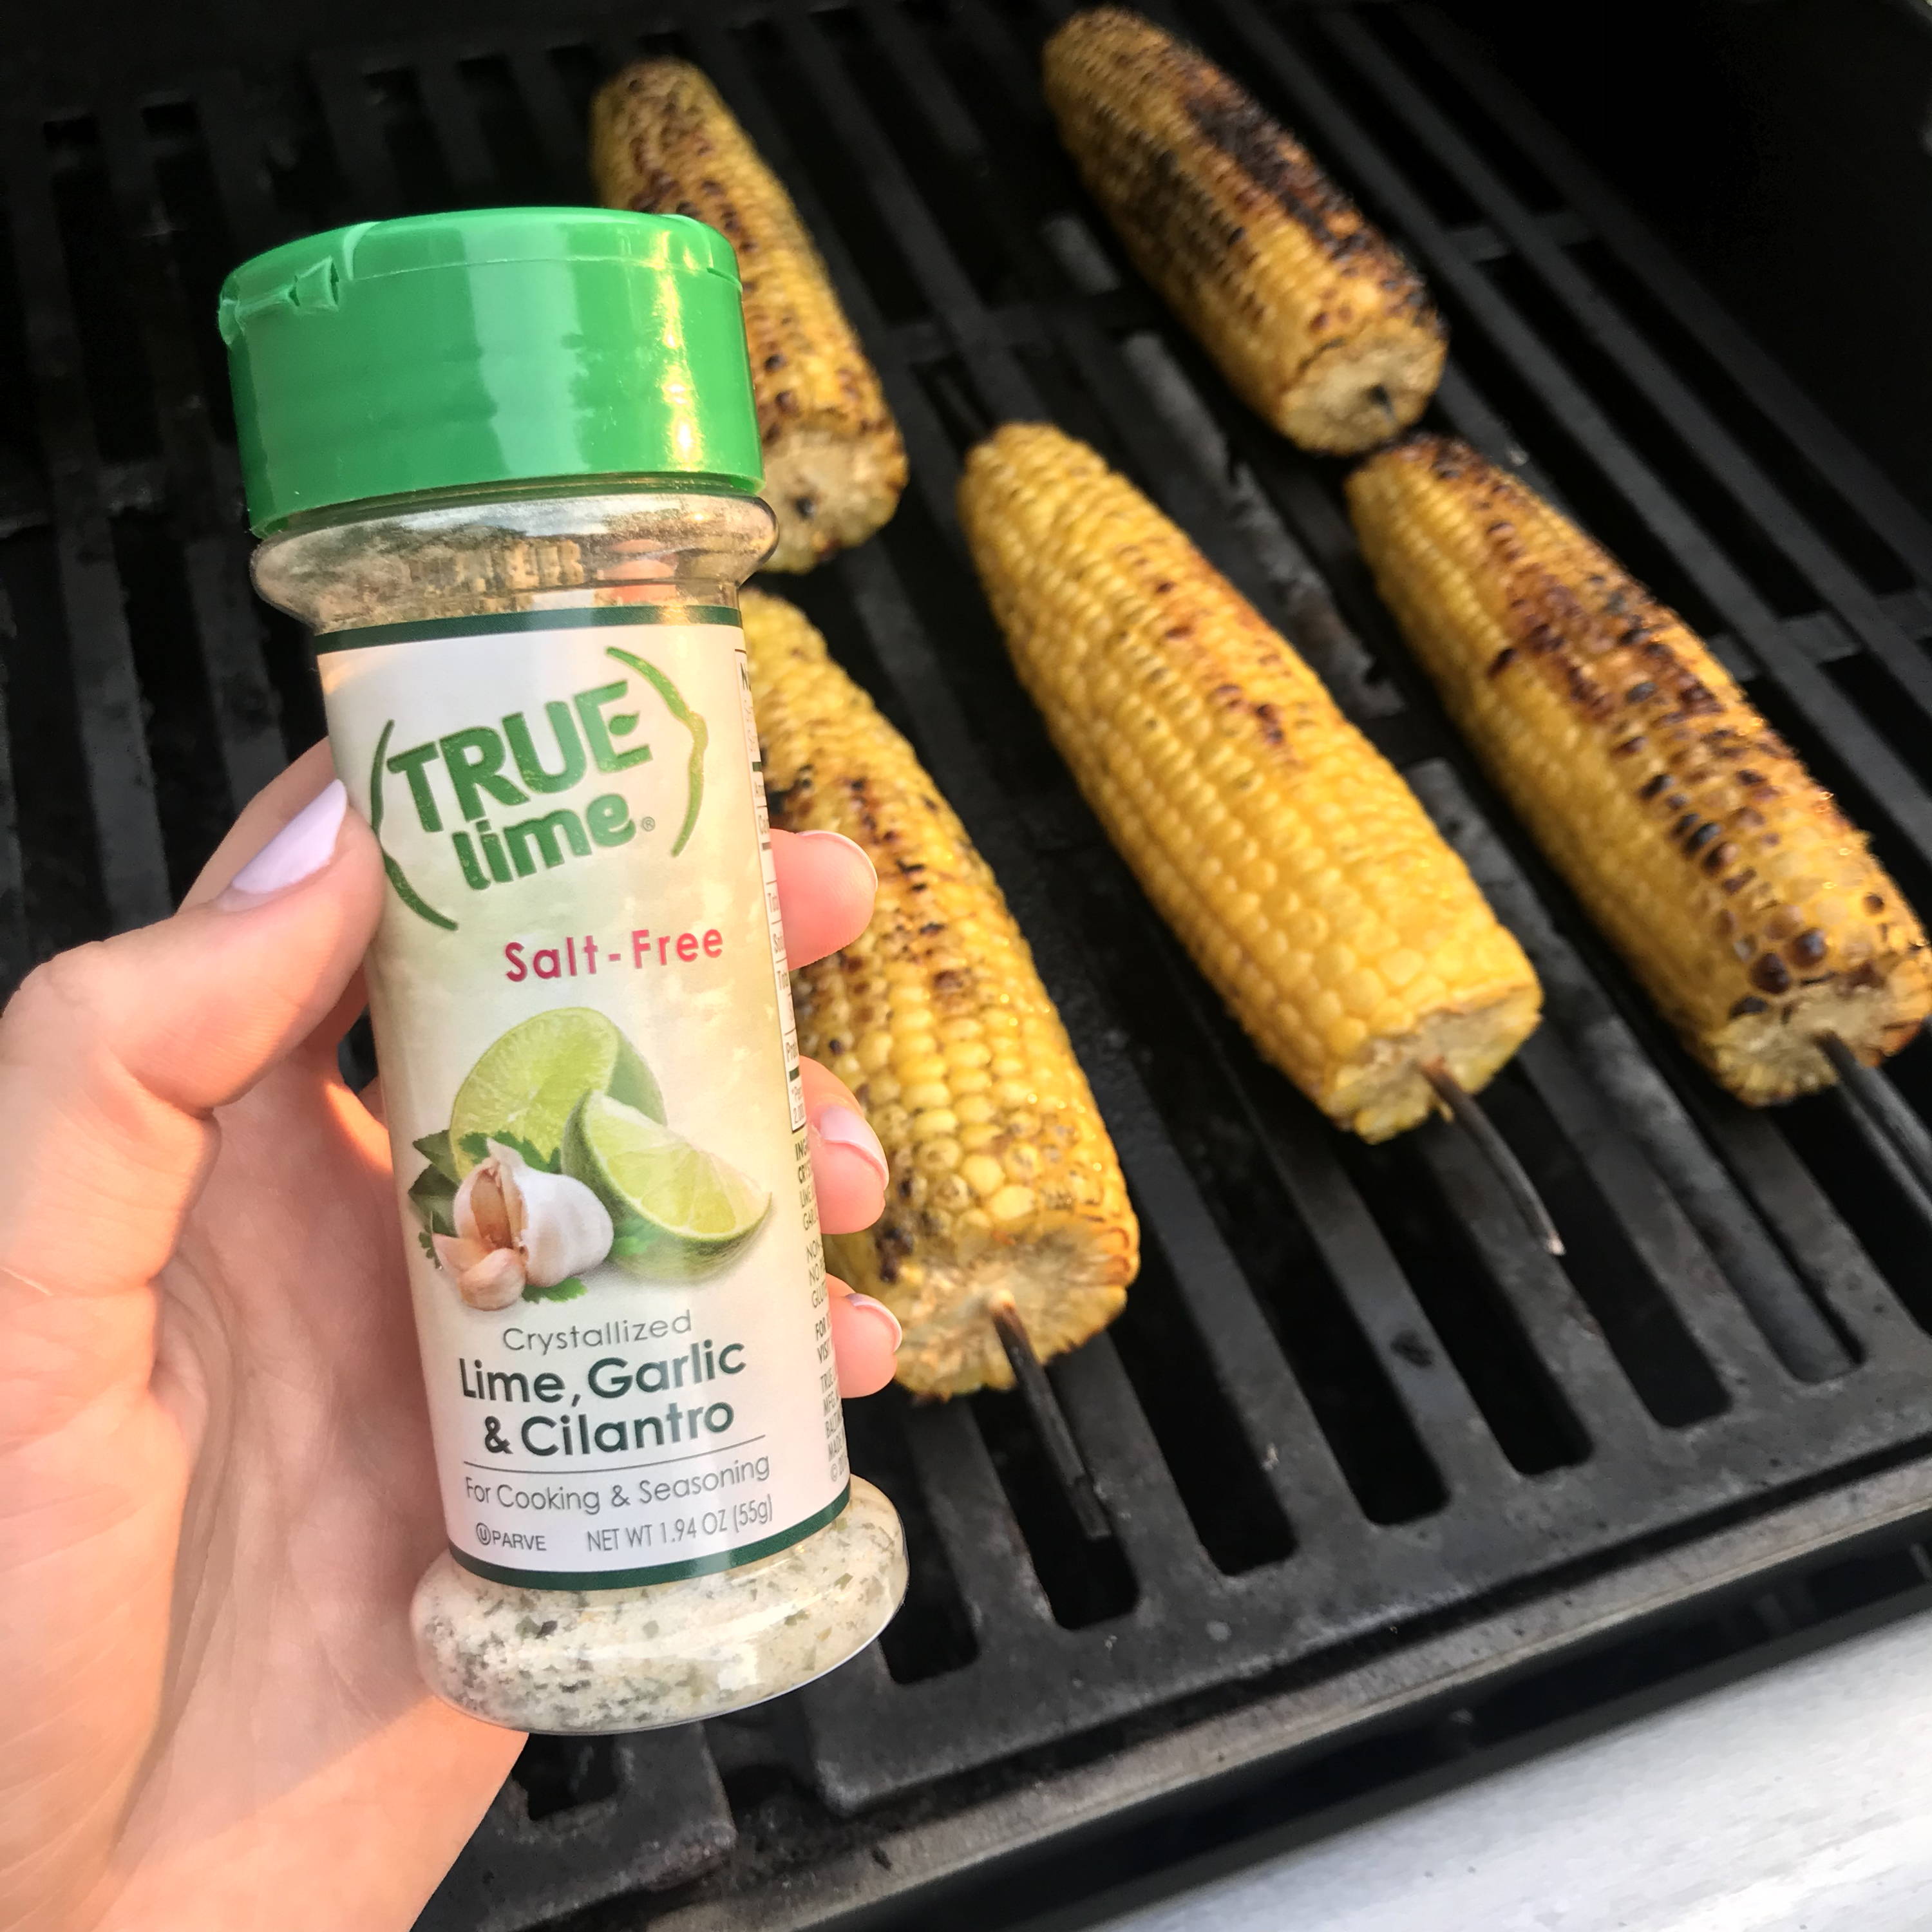 True Lime seasoning next to grilled corn